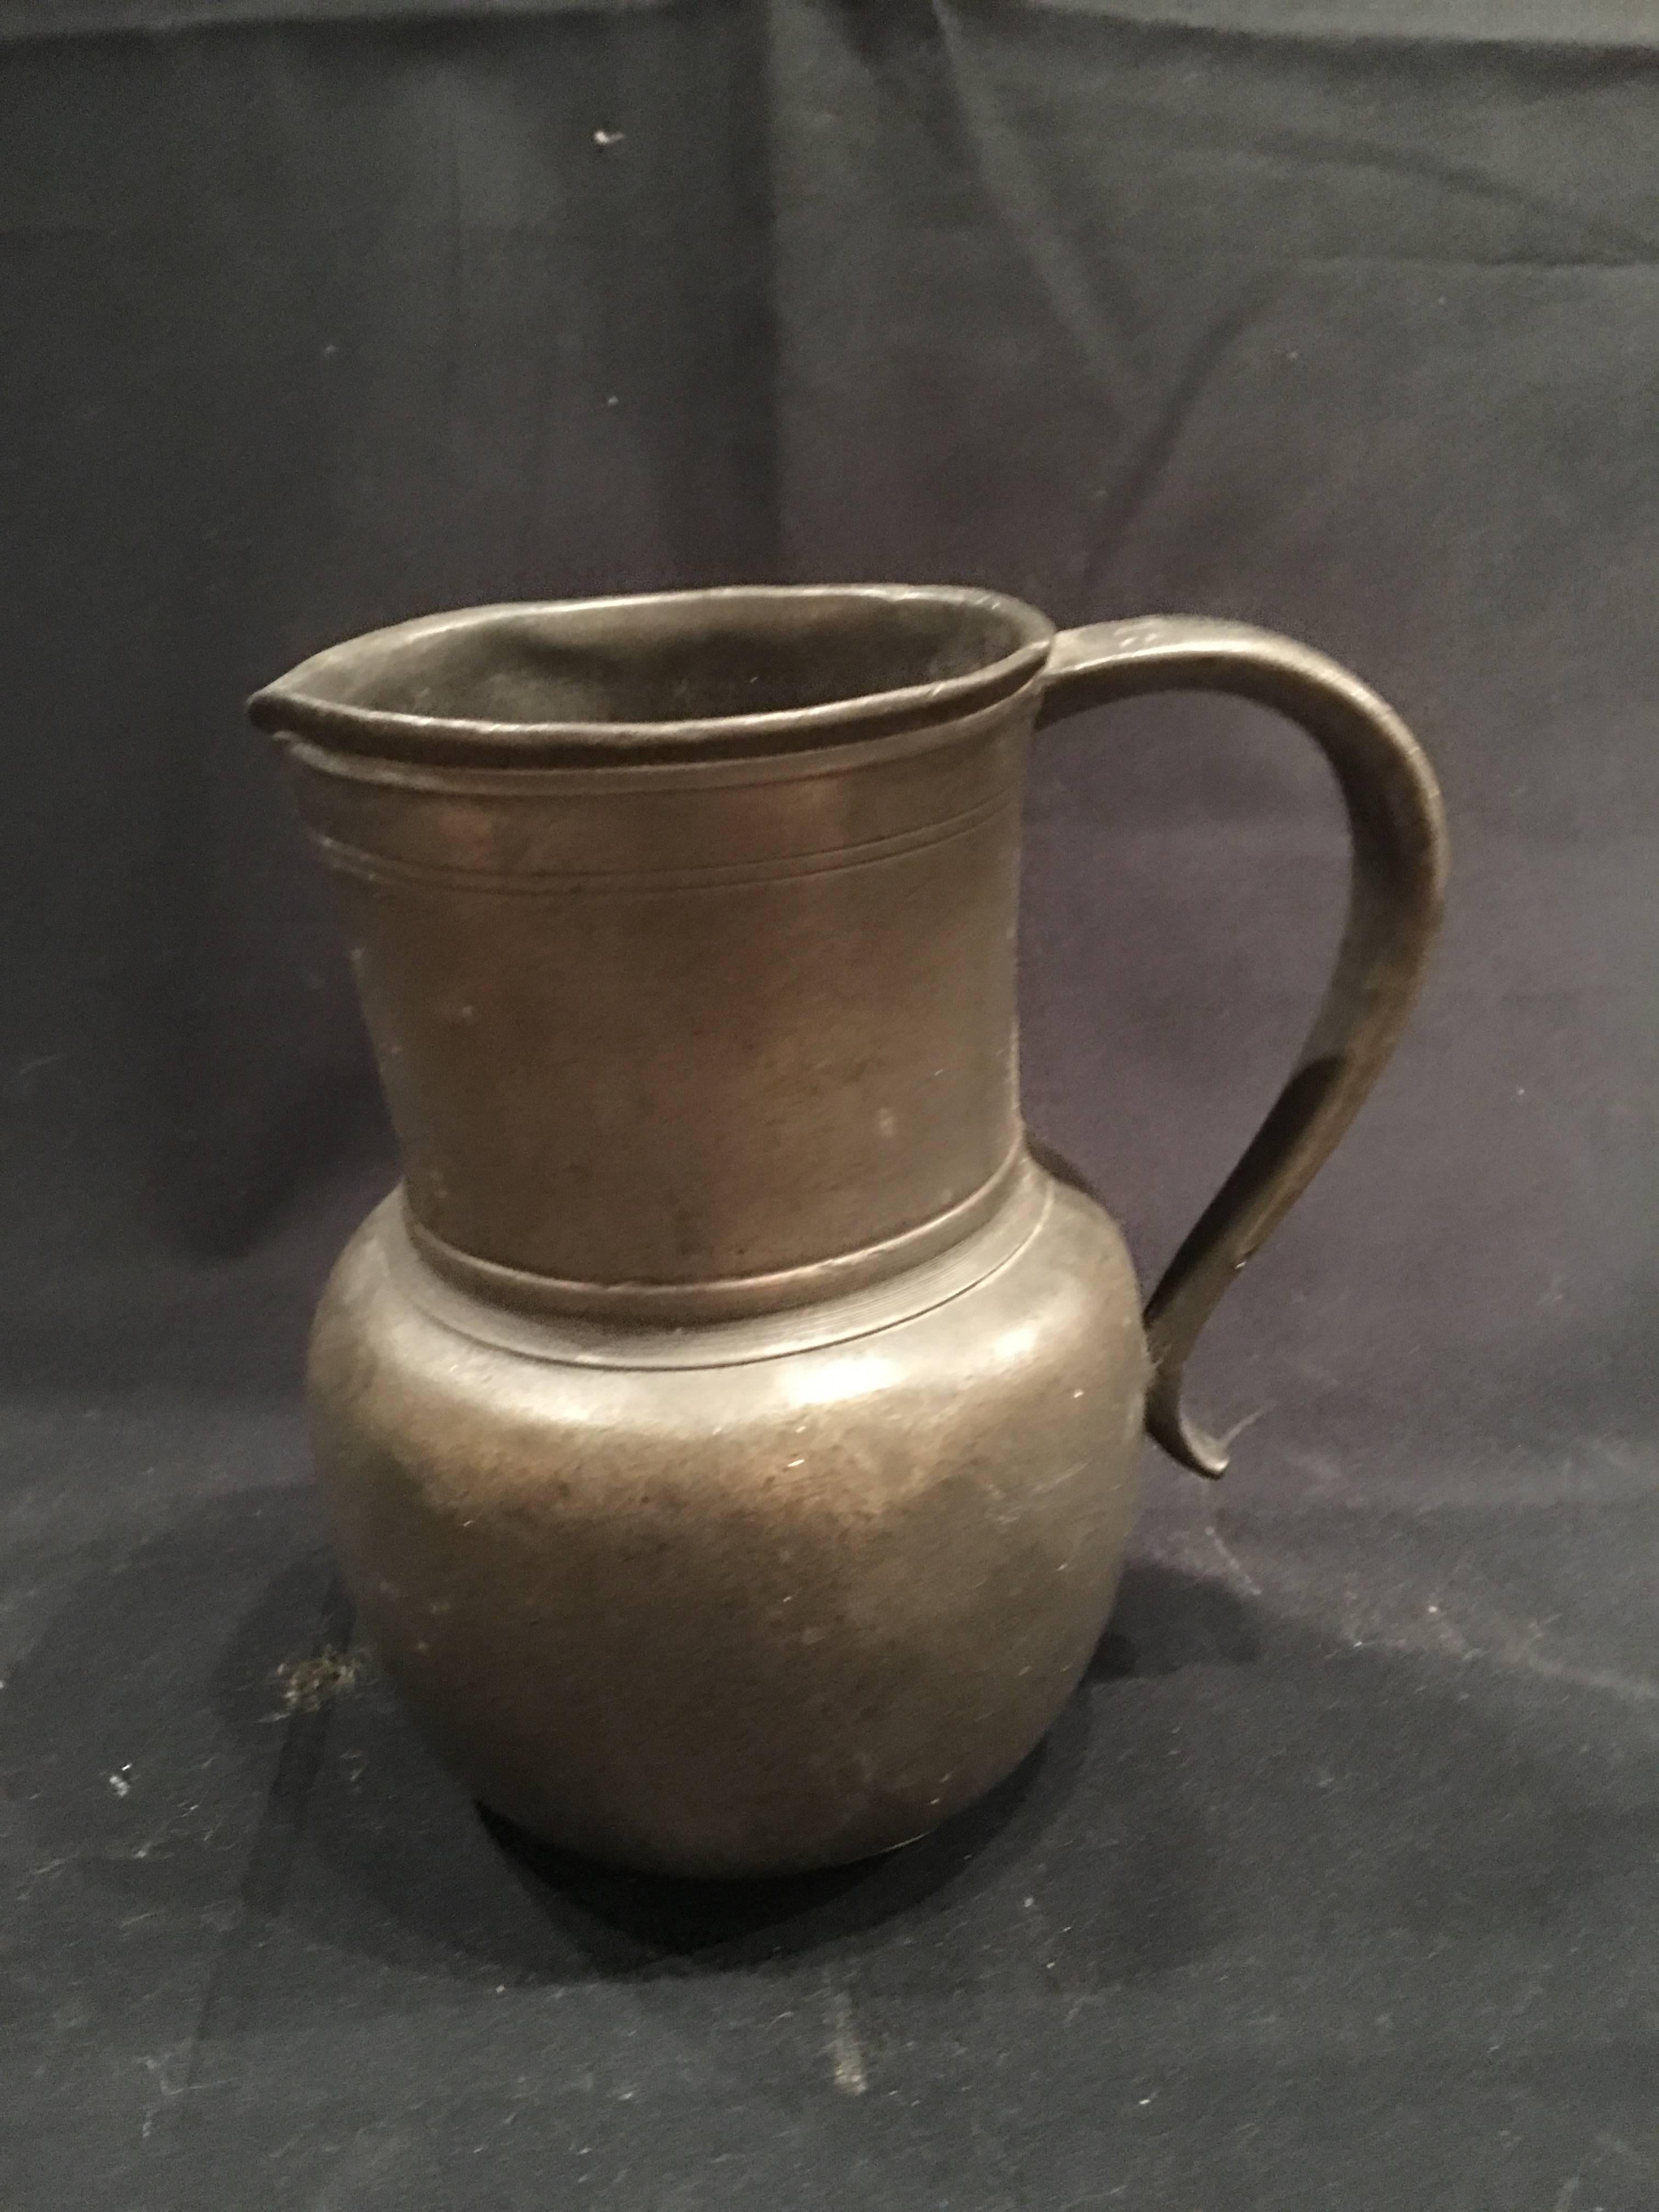 English Pewter jug or pitcher with a handle, 19th century.